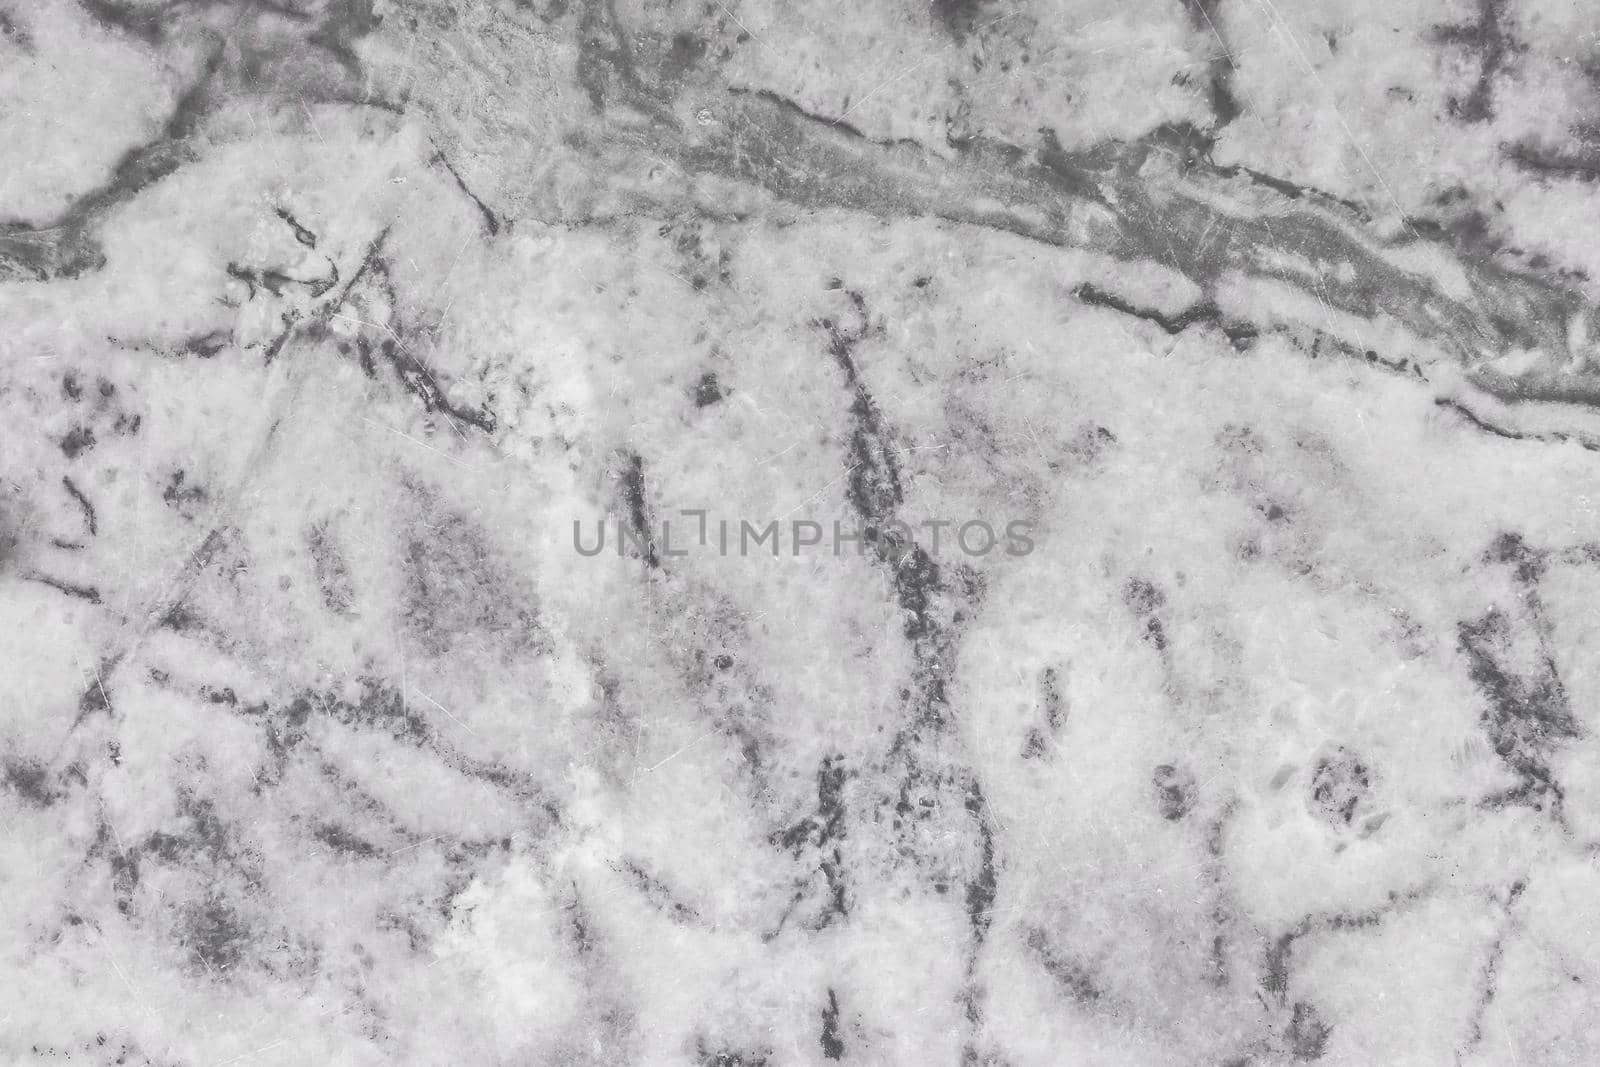 Gray stone granite or old marble slab surface with abstract dark pattern texture background.